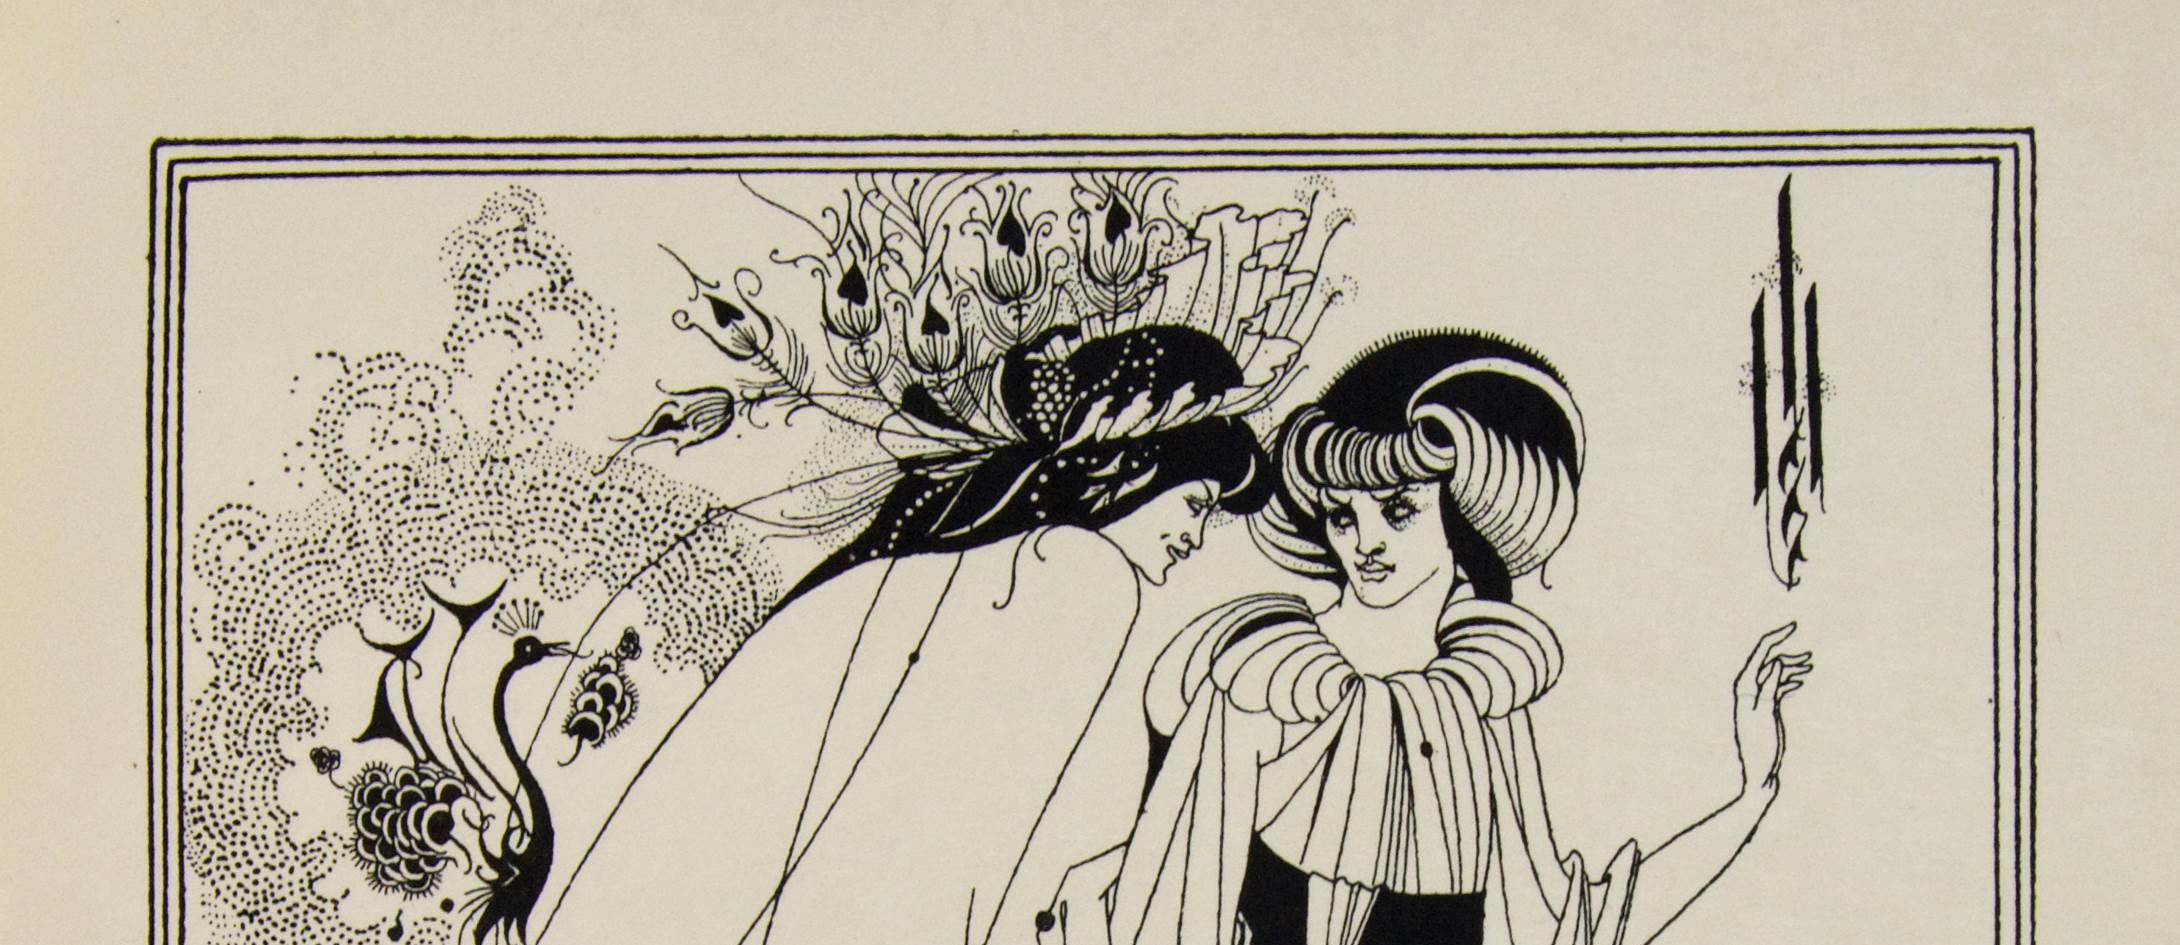 Aubrey Beardsley: The R.A. Walker and W.G. Good Collection